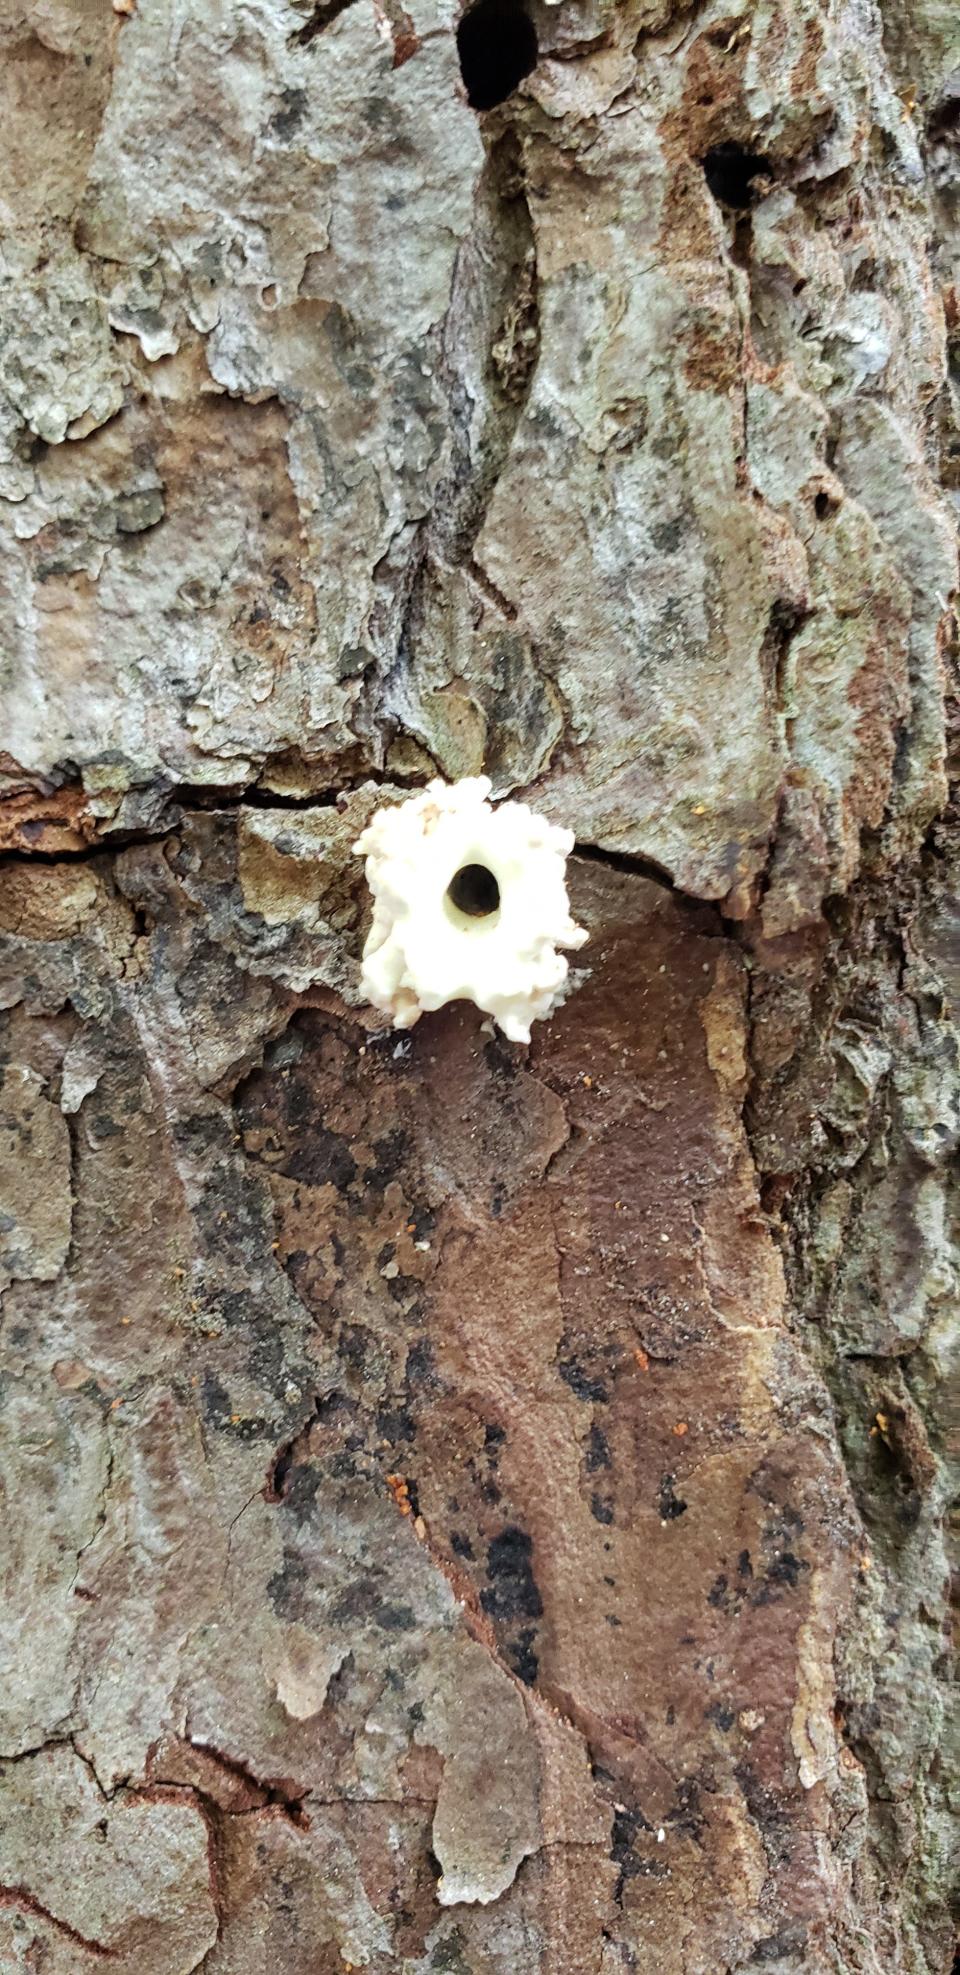 A resin or pitch on a pine tree that secreted out due to pine beetles' attack.